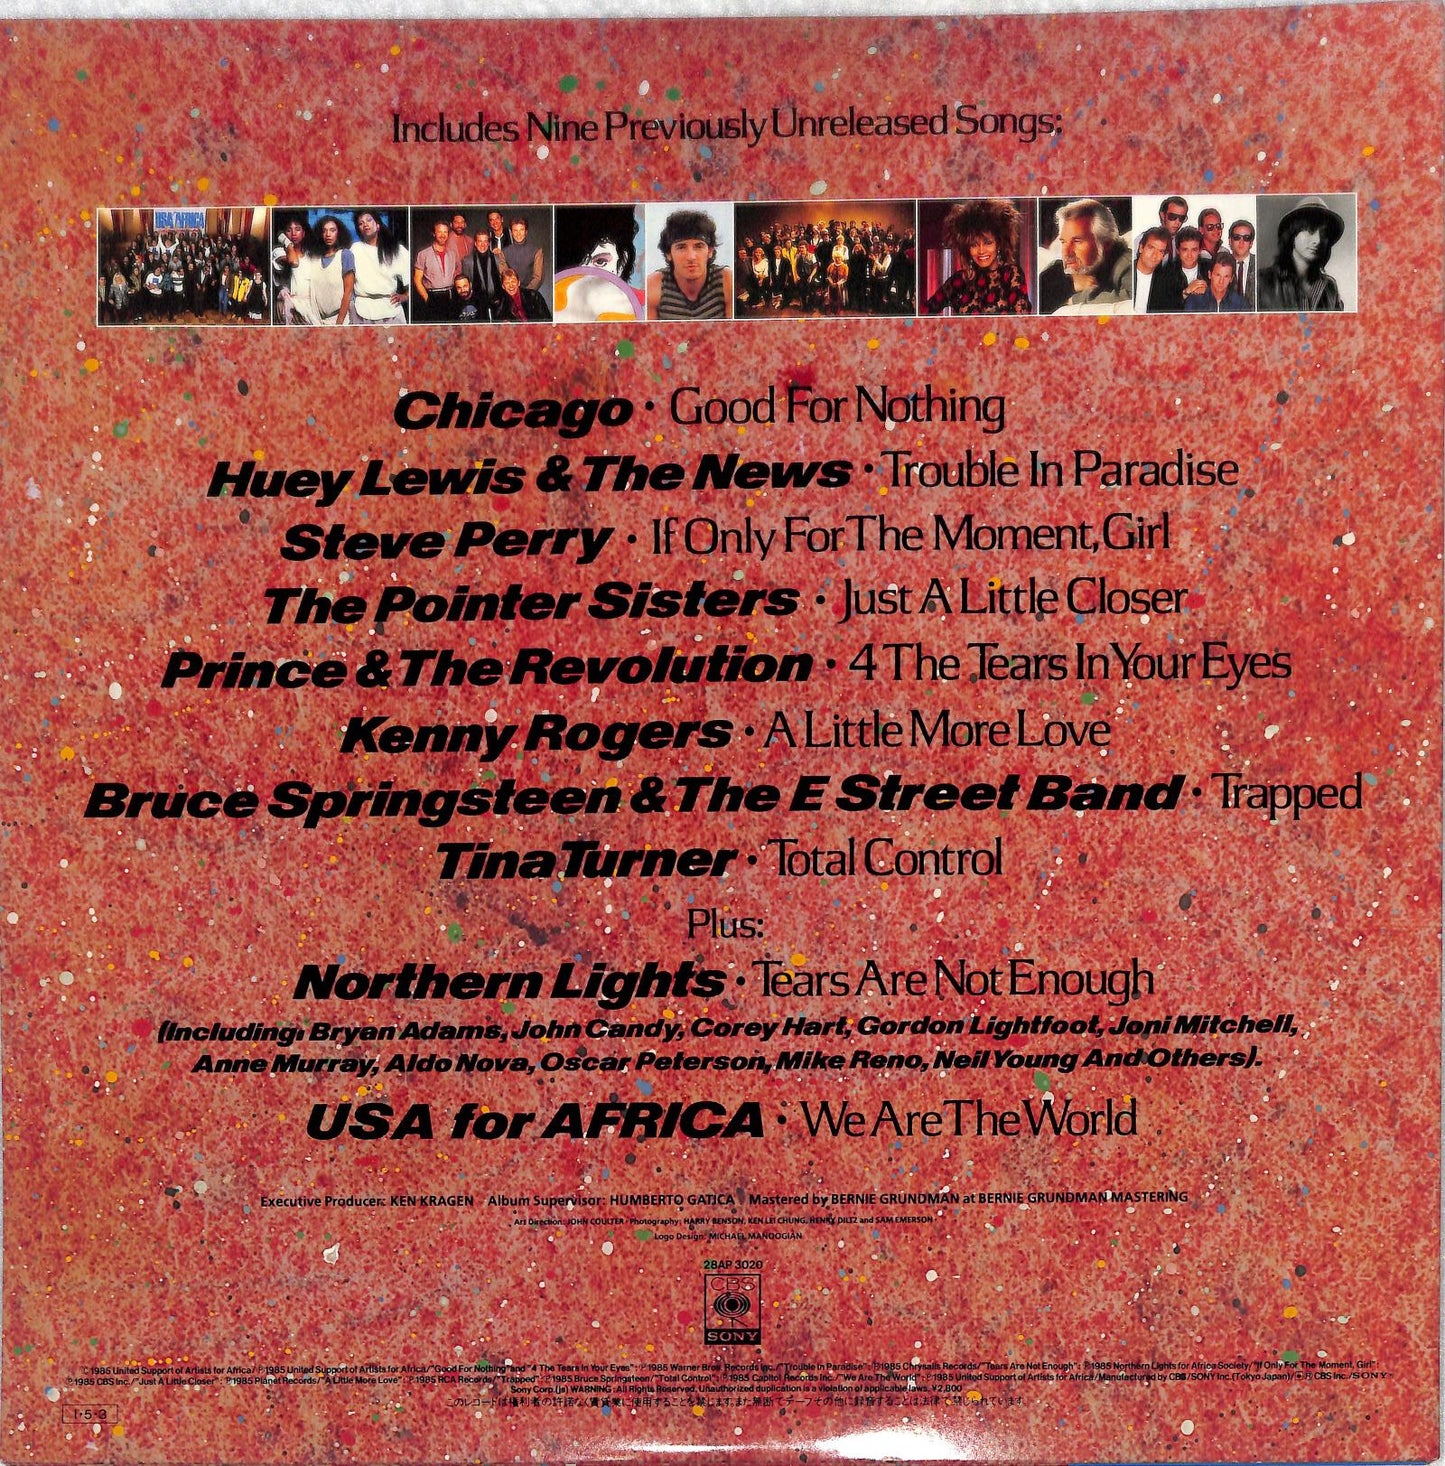 USA FOR AFRICA - We Are The World